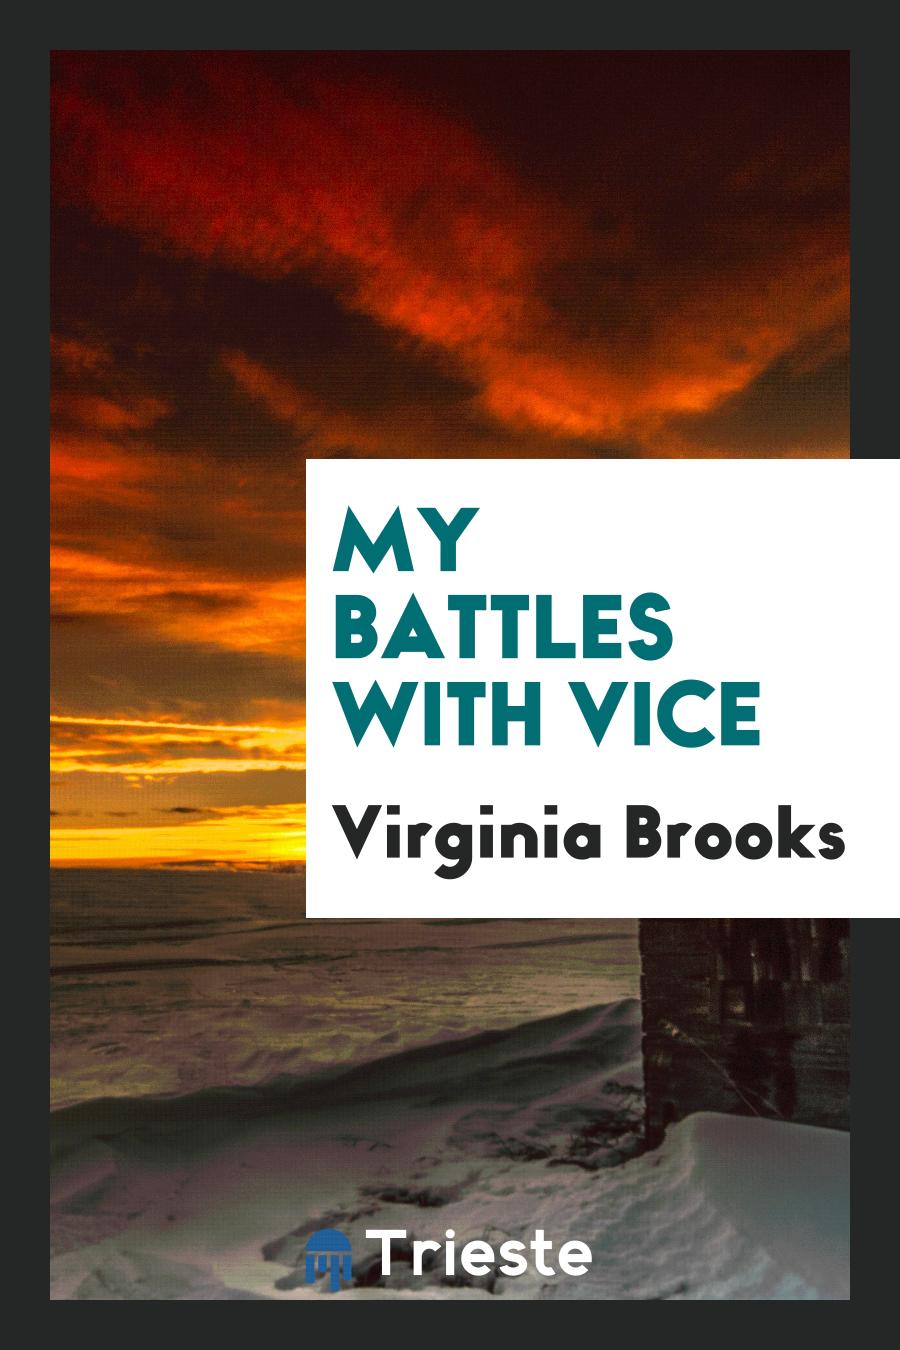 My Battles with Vice